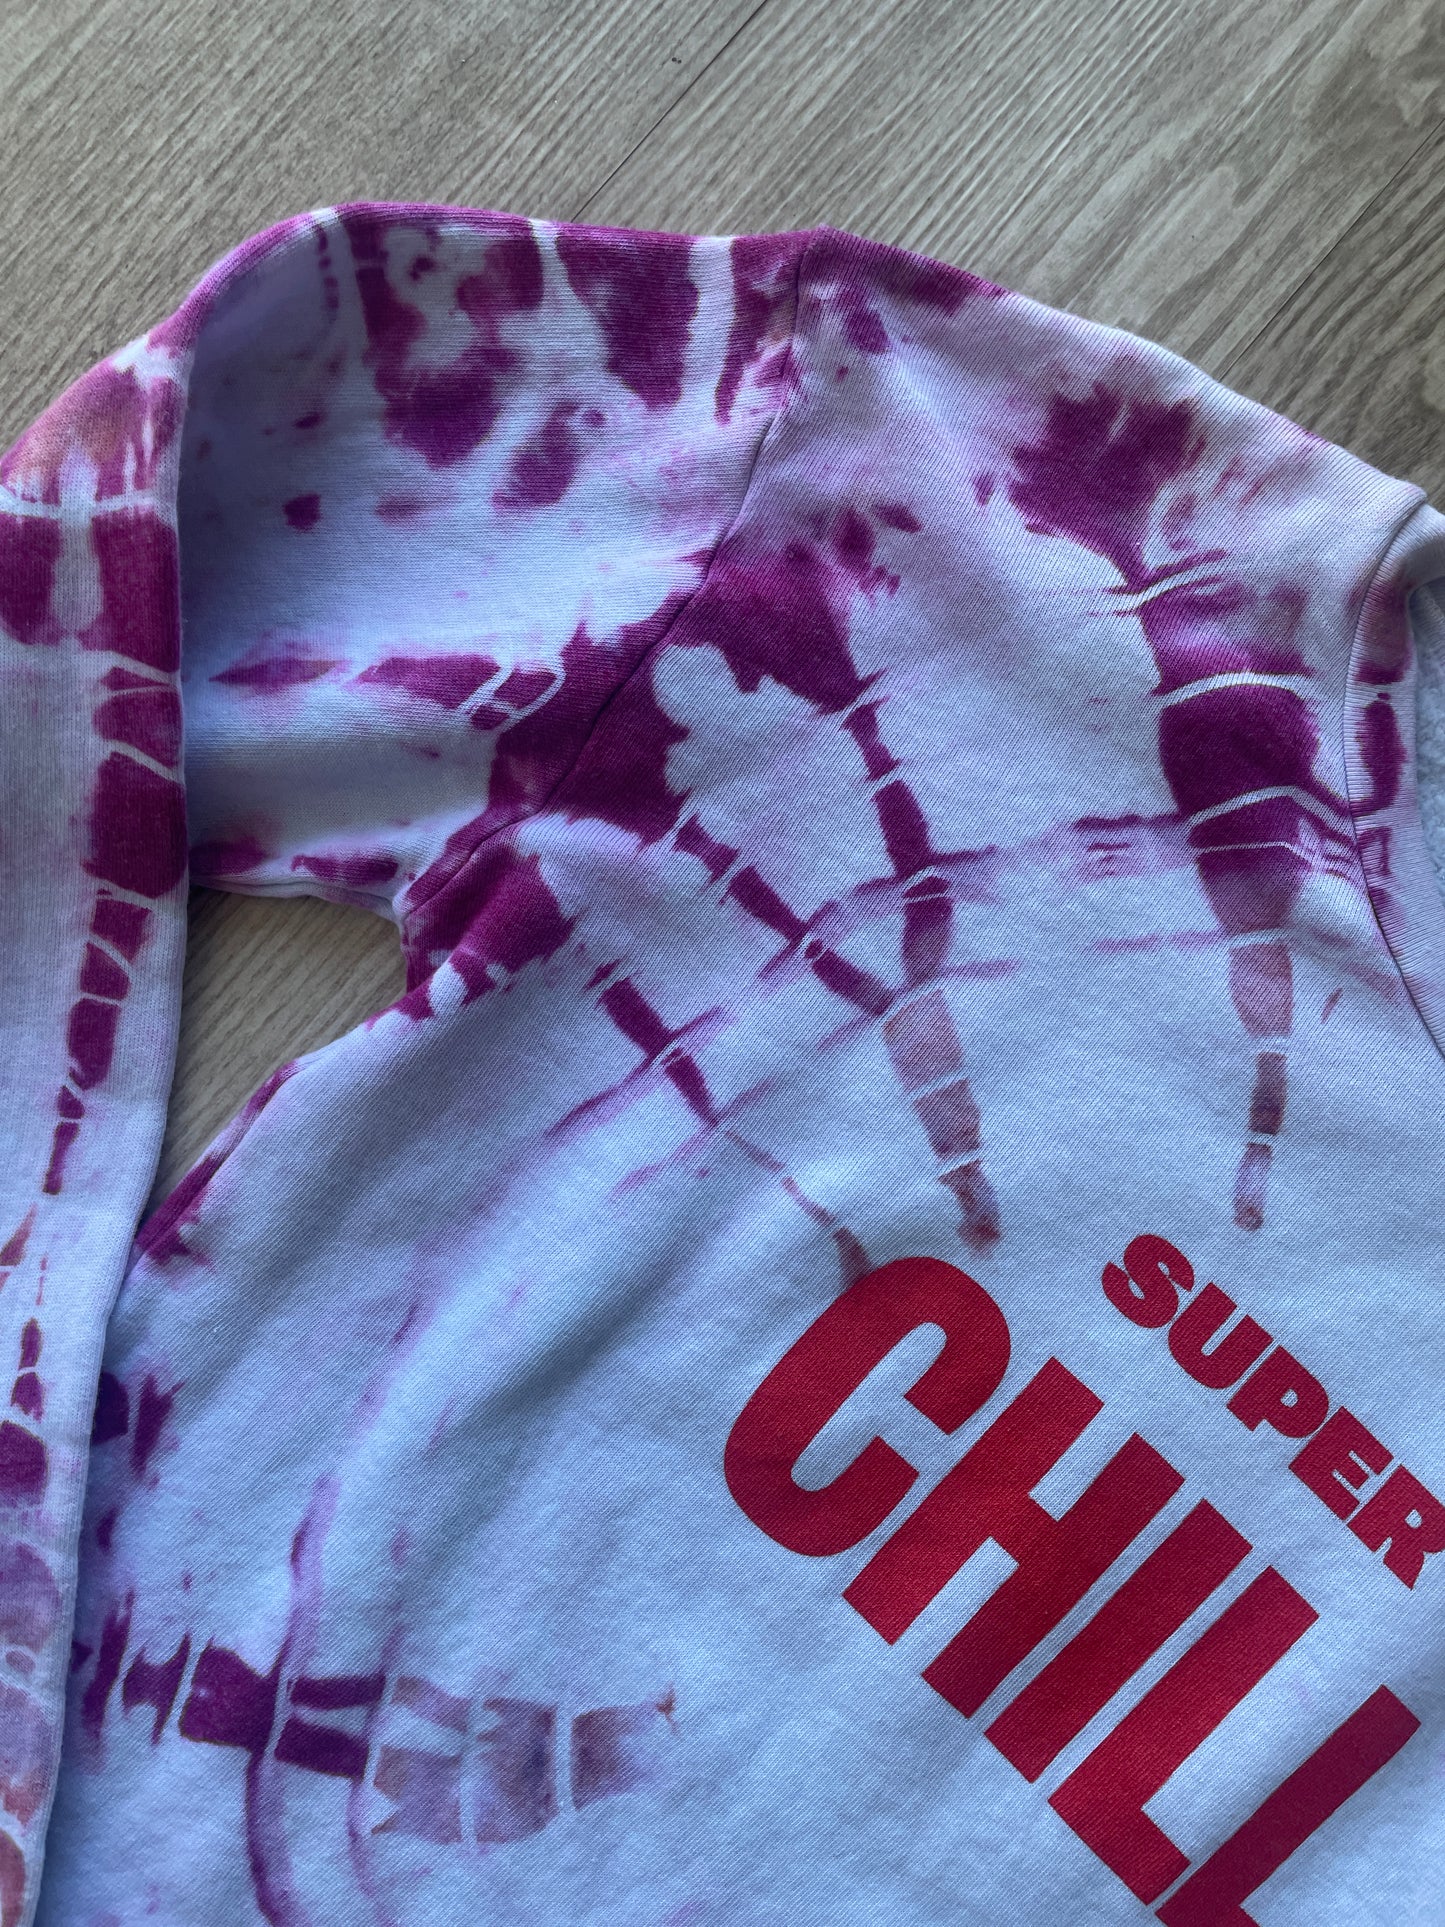 Large Women's Super Chill Shaka Handmade Tie Dye Long Sleeve Sweatshirt | One-Of-a-Kind Upcycled White and Pink Geode Crewneck